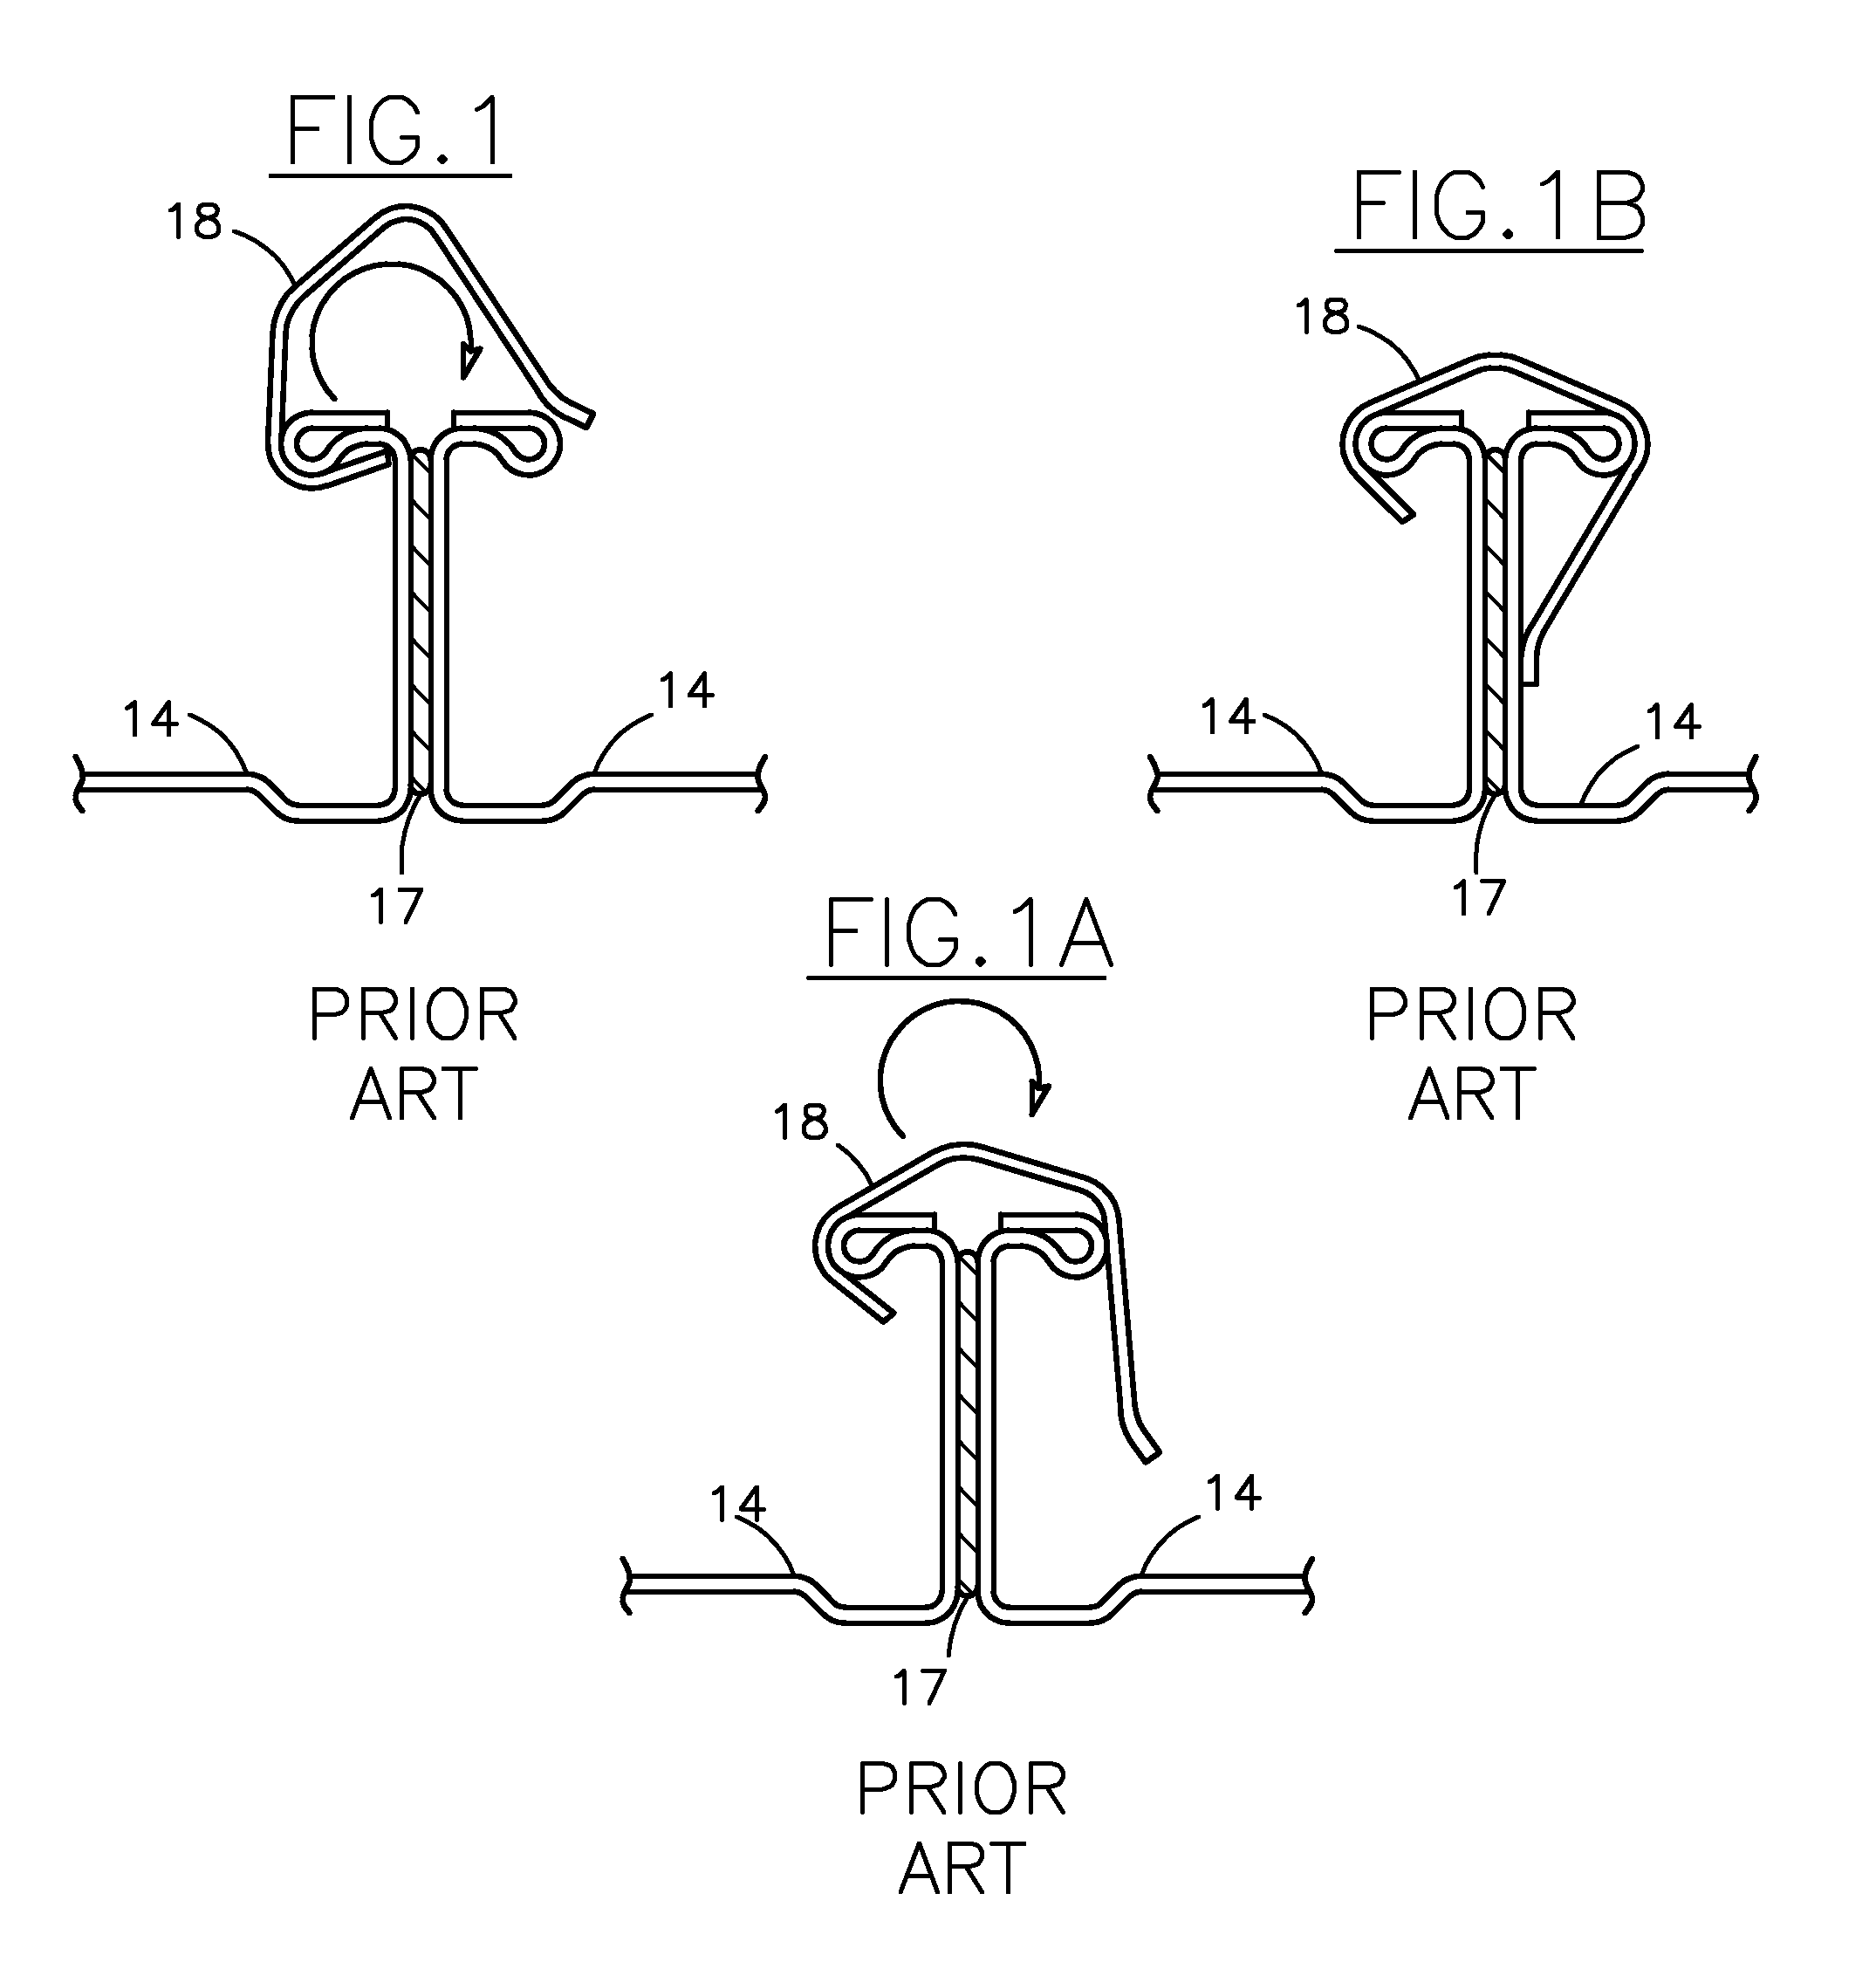 System and method for joining and hanging ducts